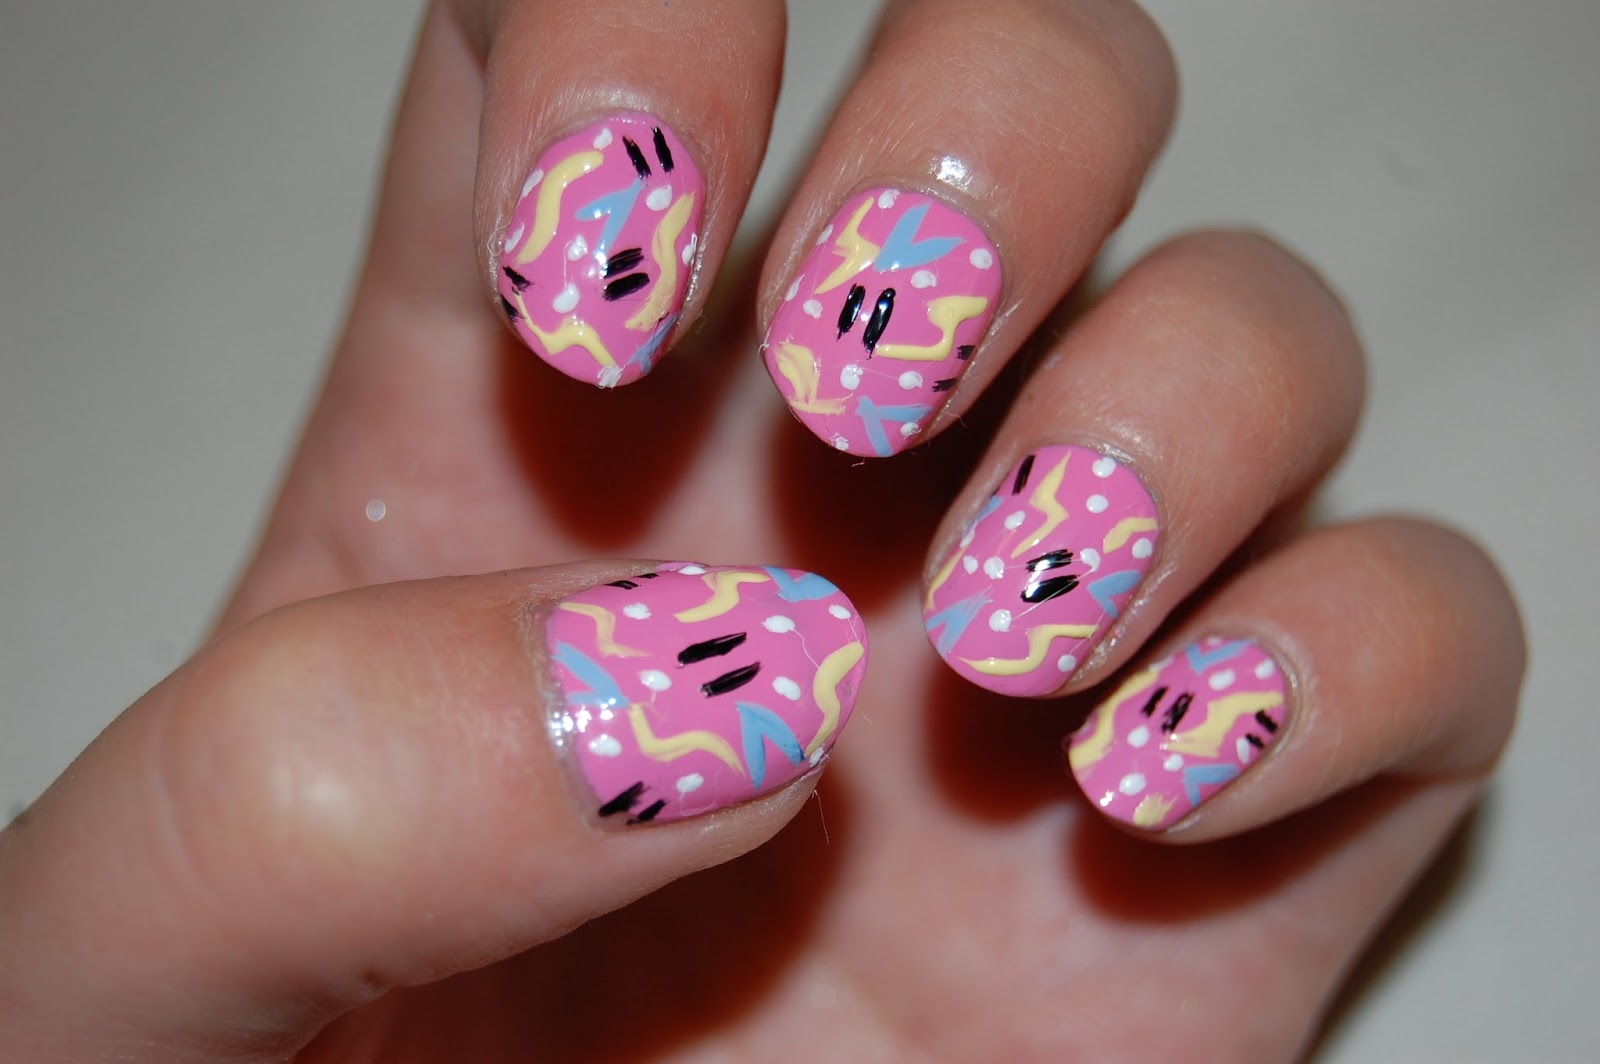 1. "90s inspired nail art designs" - wide 6